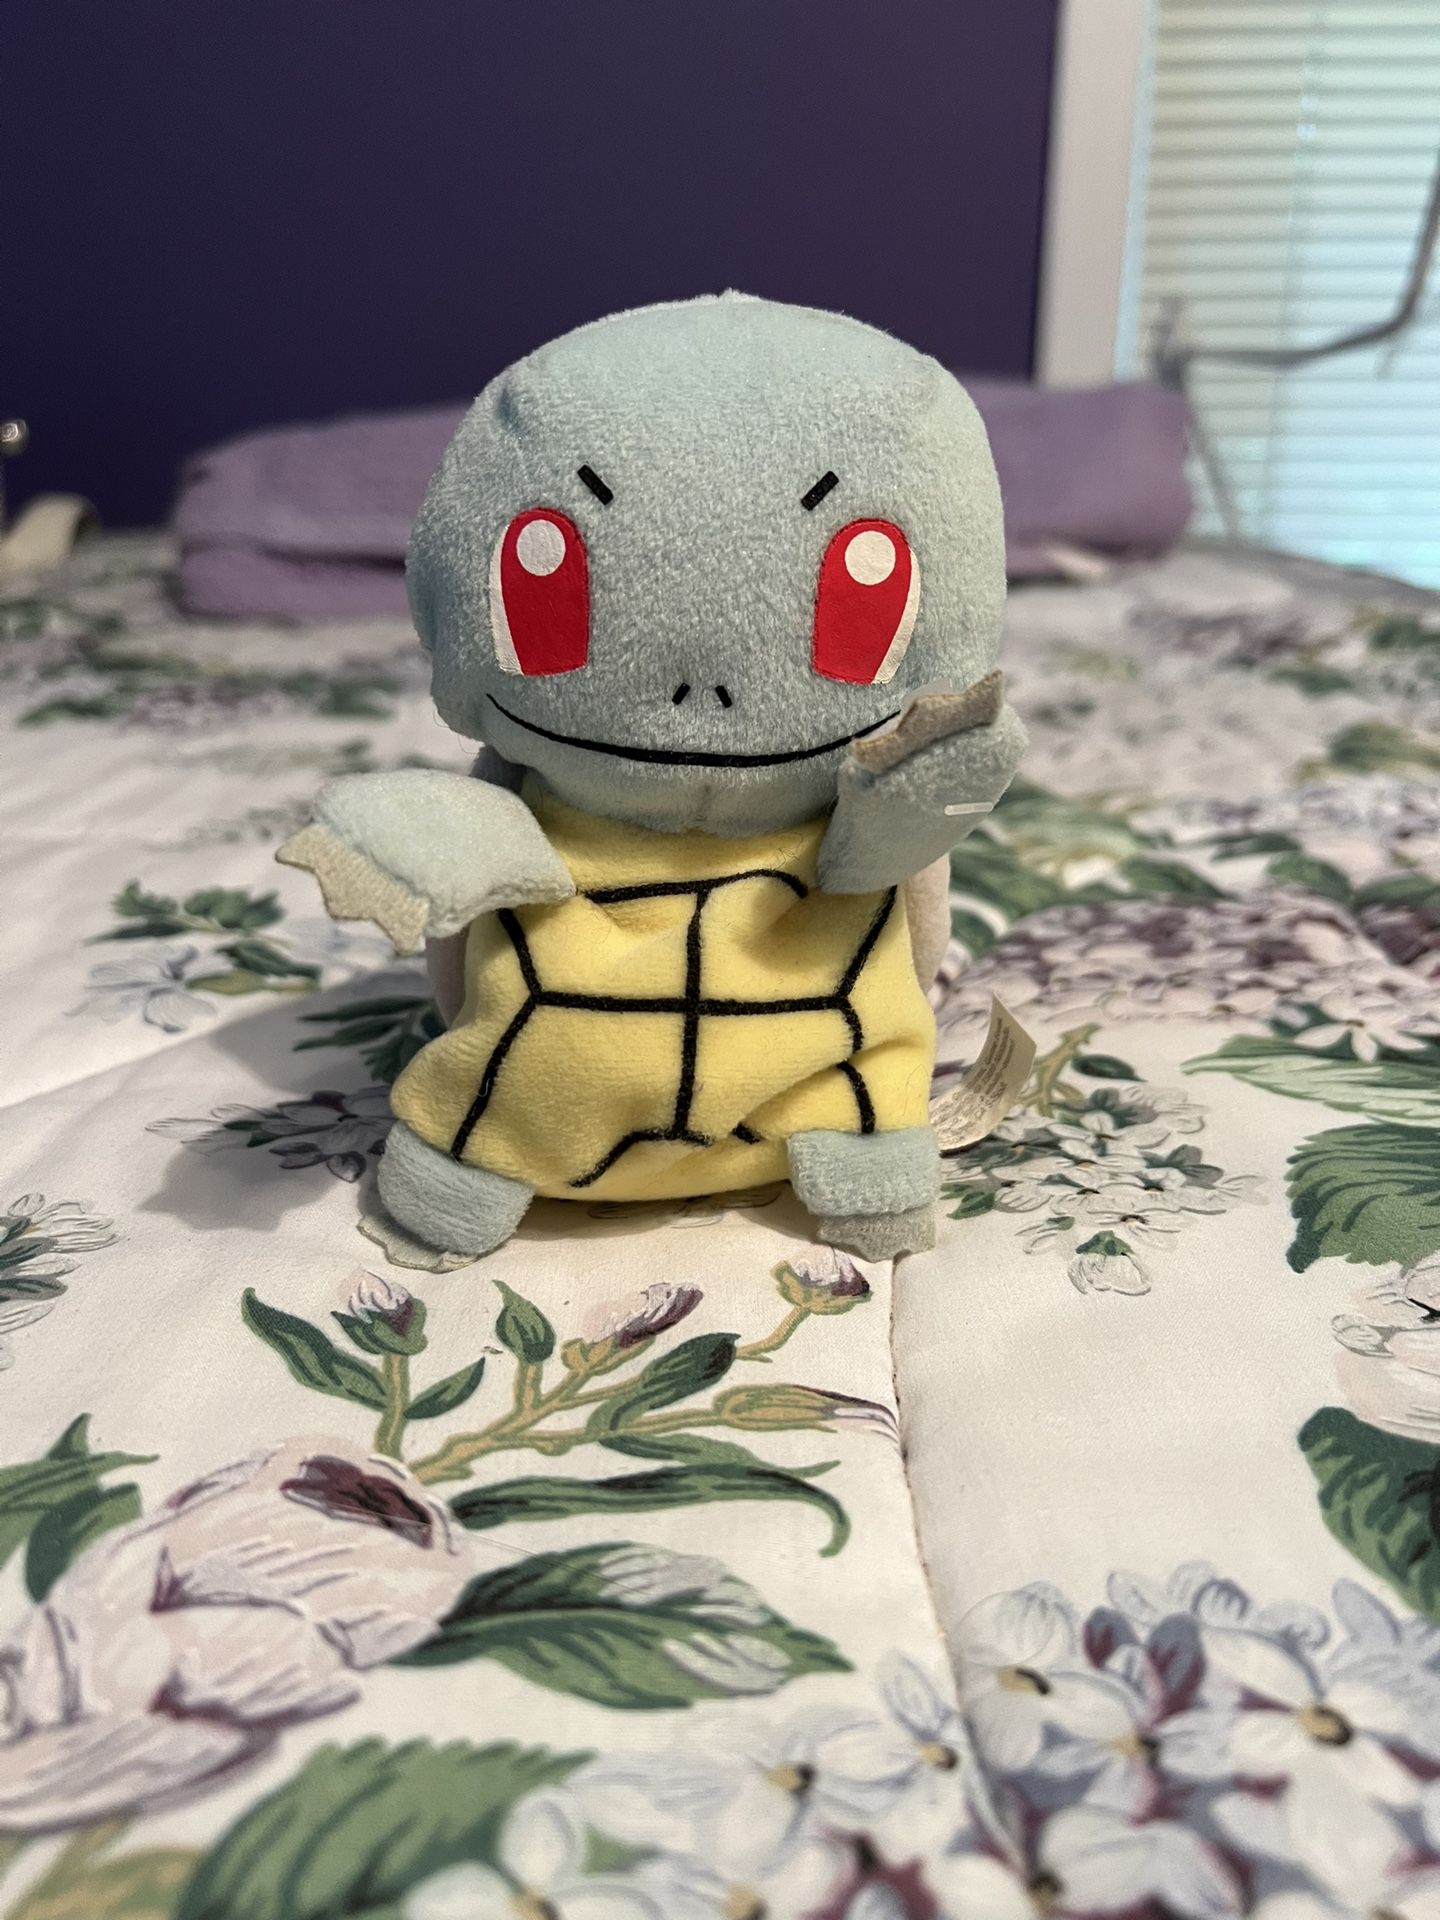 Pokémon 1999 Treat Keepers #07 Squirtle Stuffed Plush Animal 4.5” Toy, NO CANDY